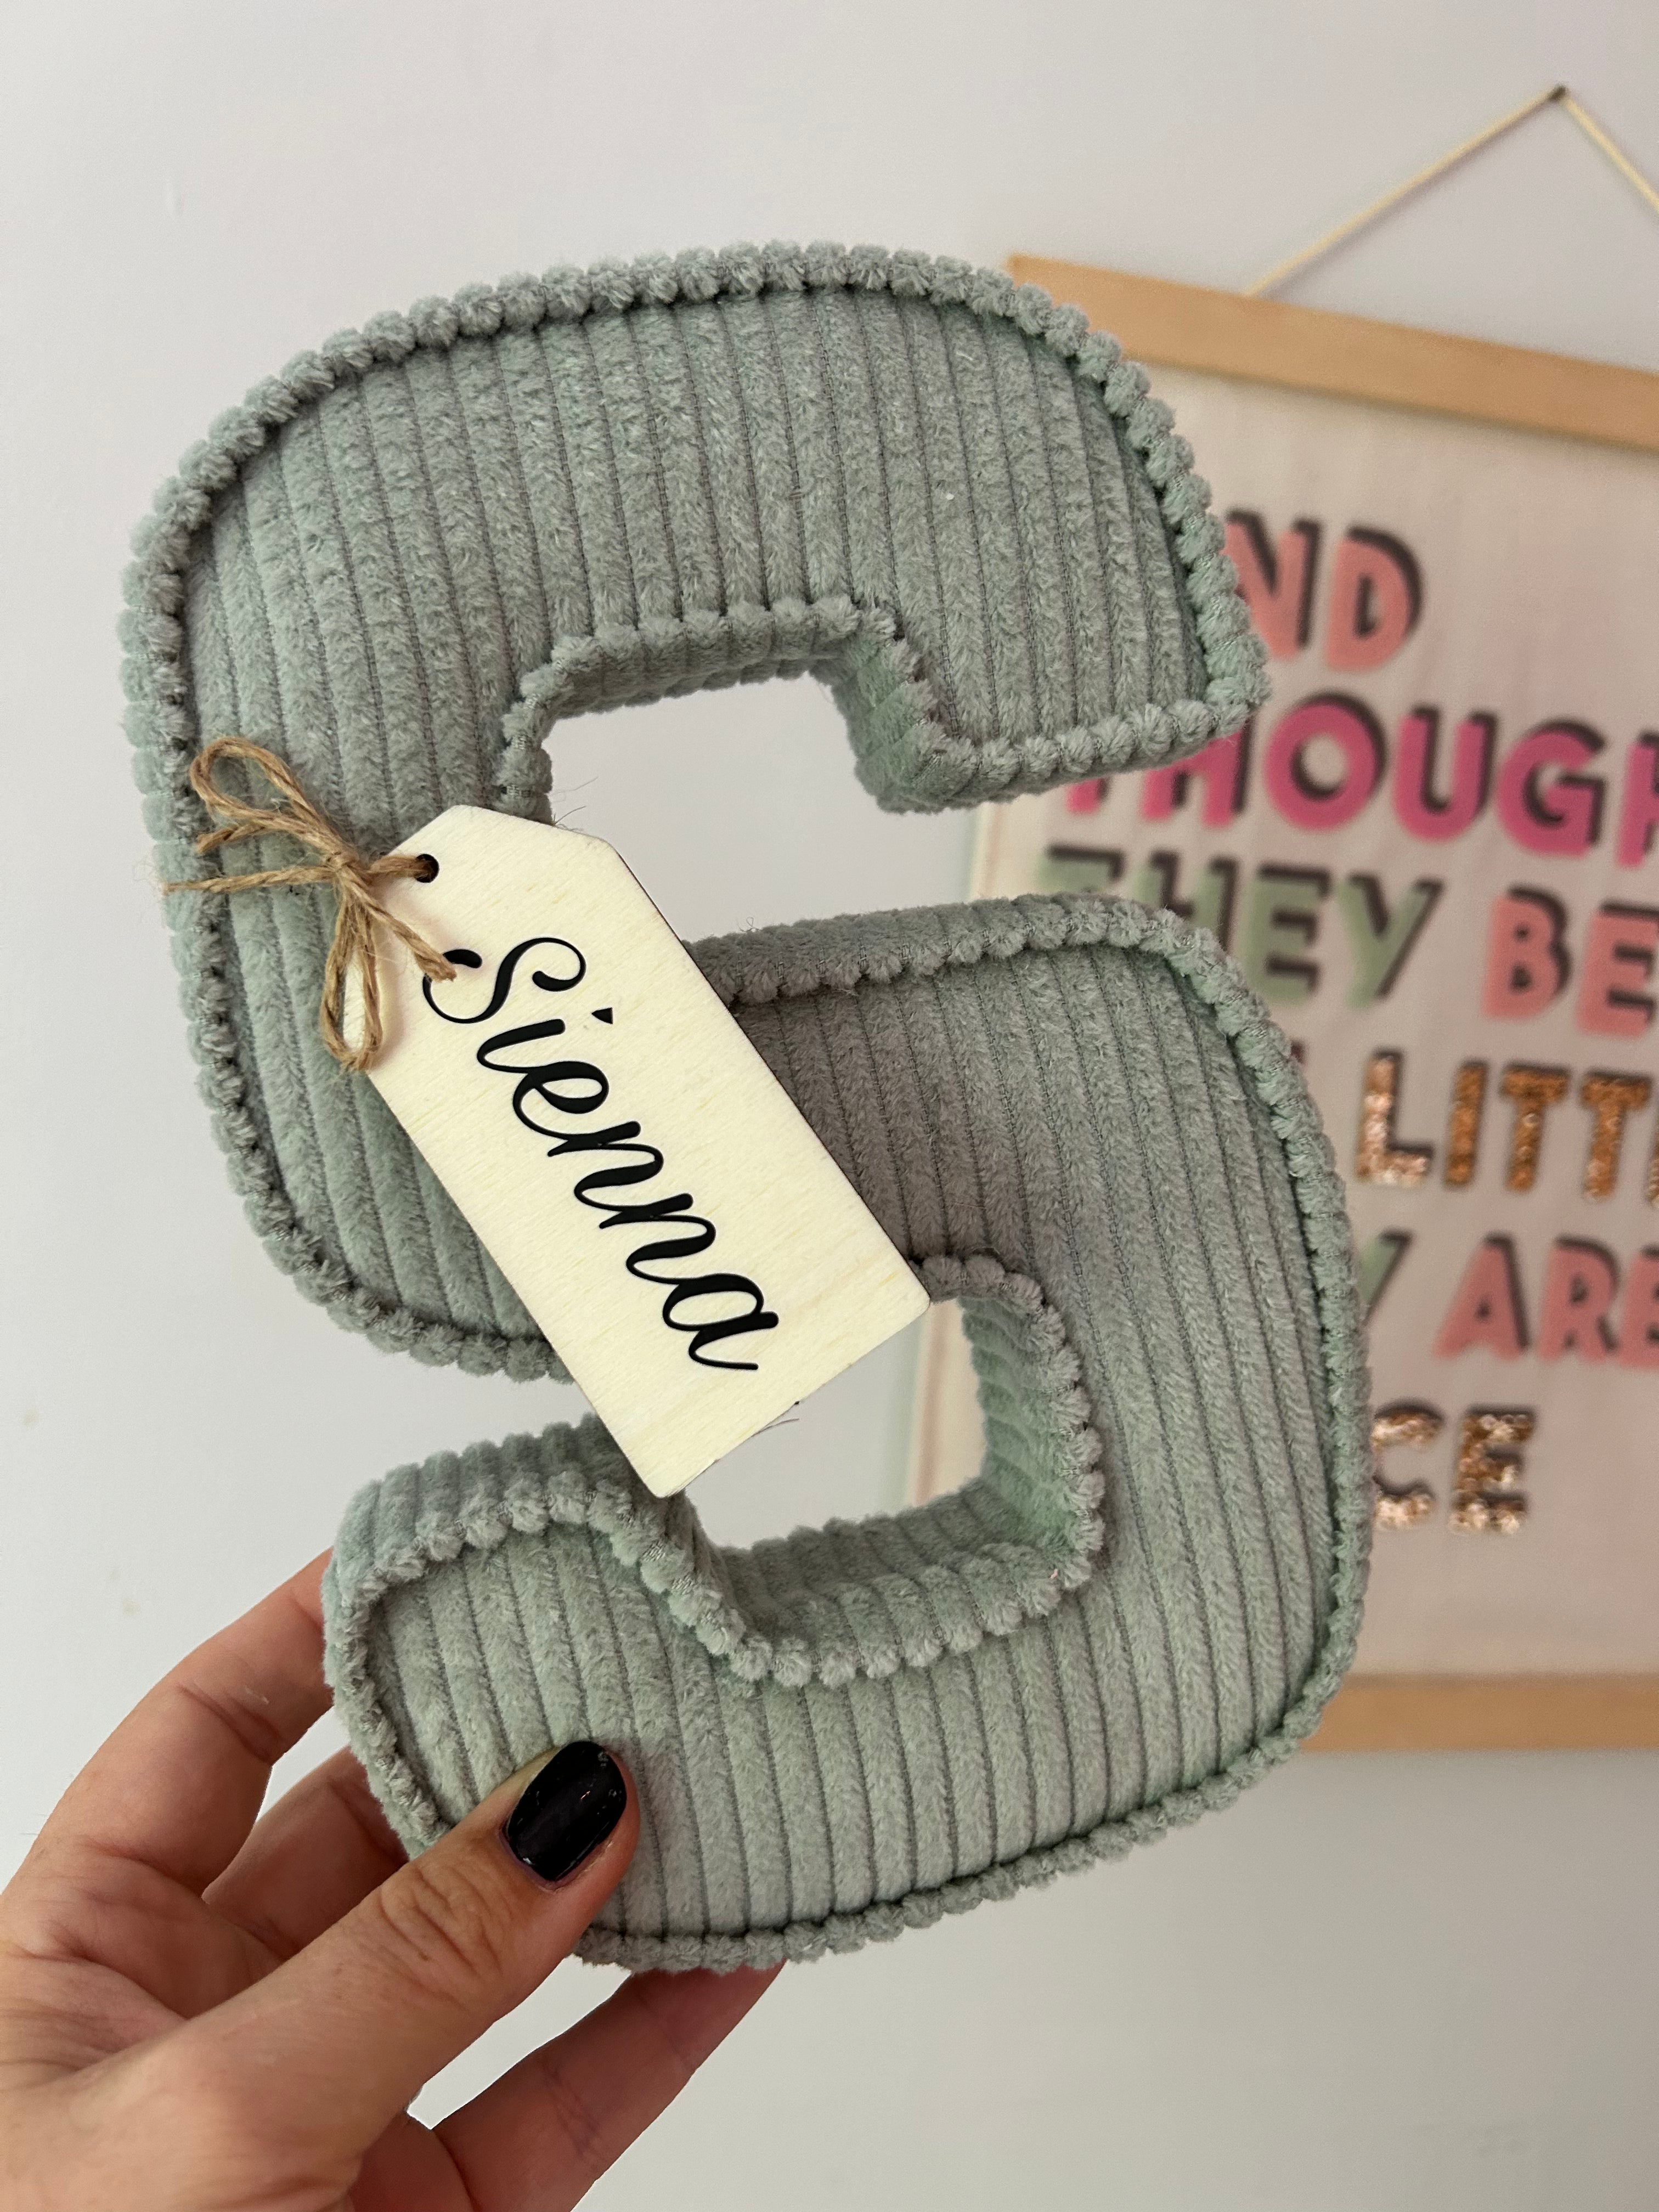 Personalised wooden name tag corduroy fabric letter